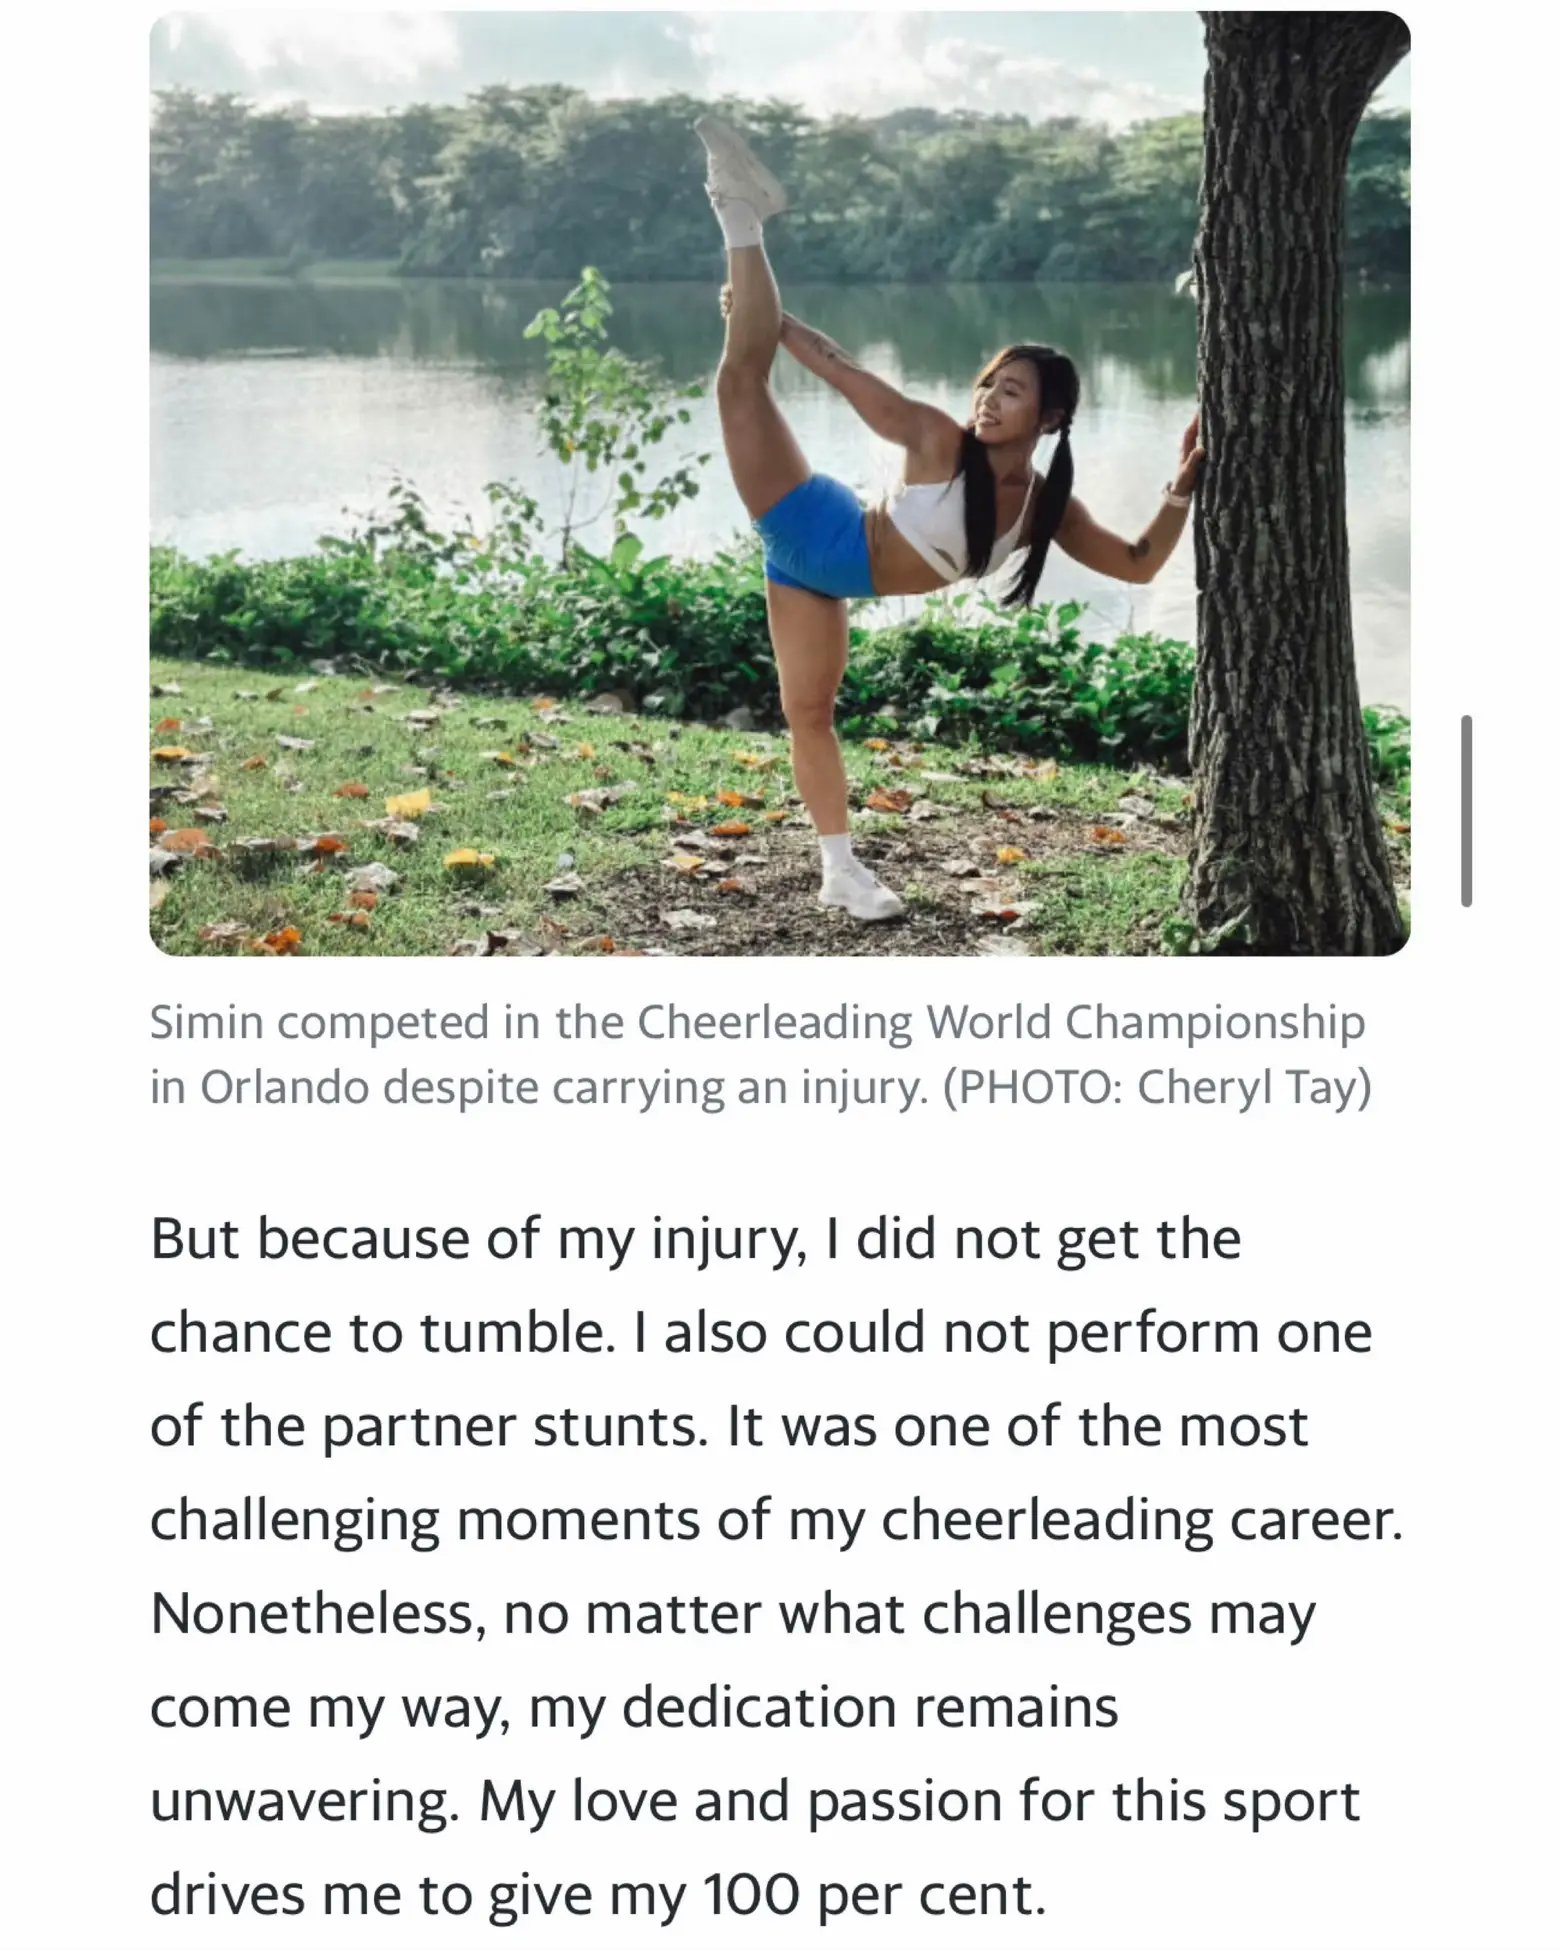 I am on this week Yahoo SG Fitspo News, Gallery posted by Siminlovecheer